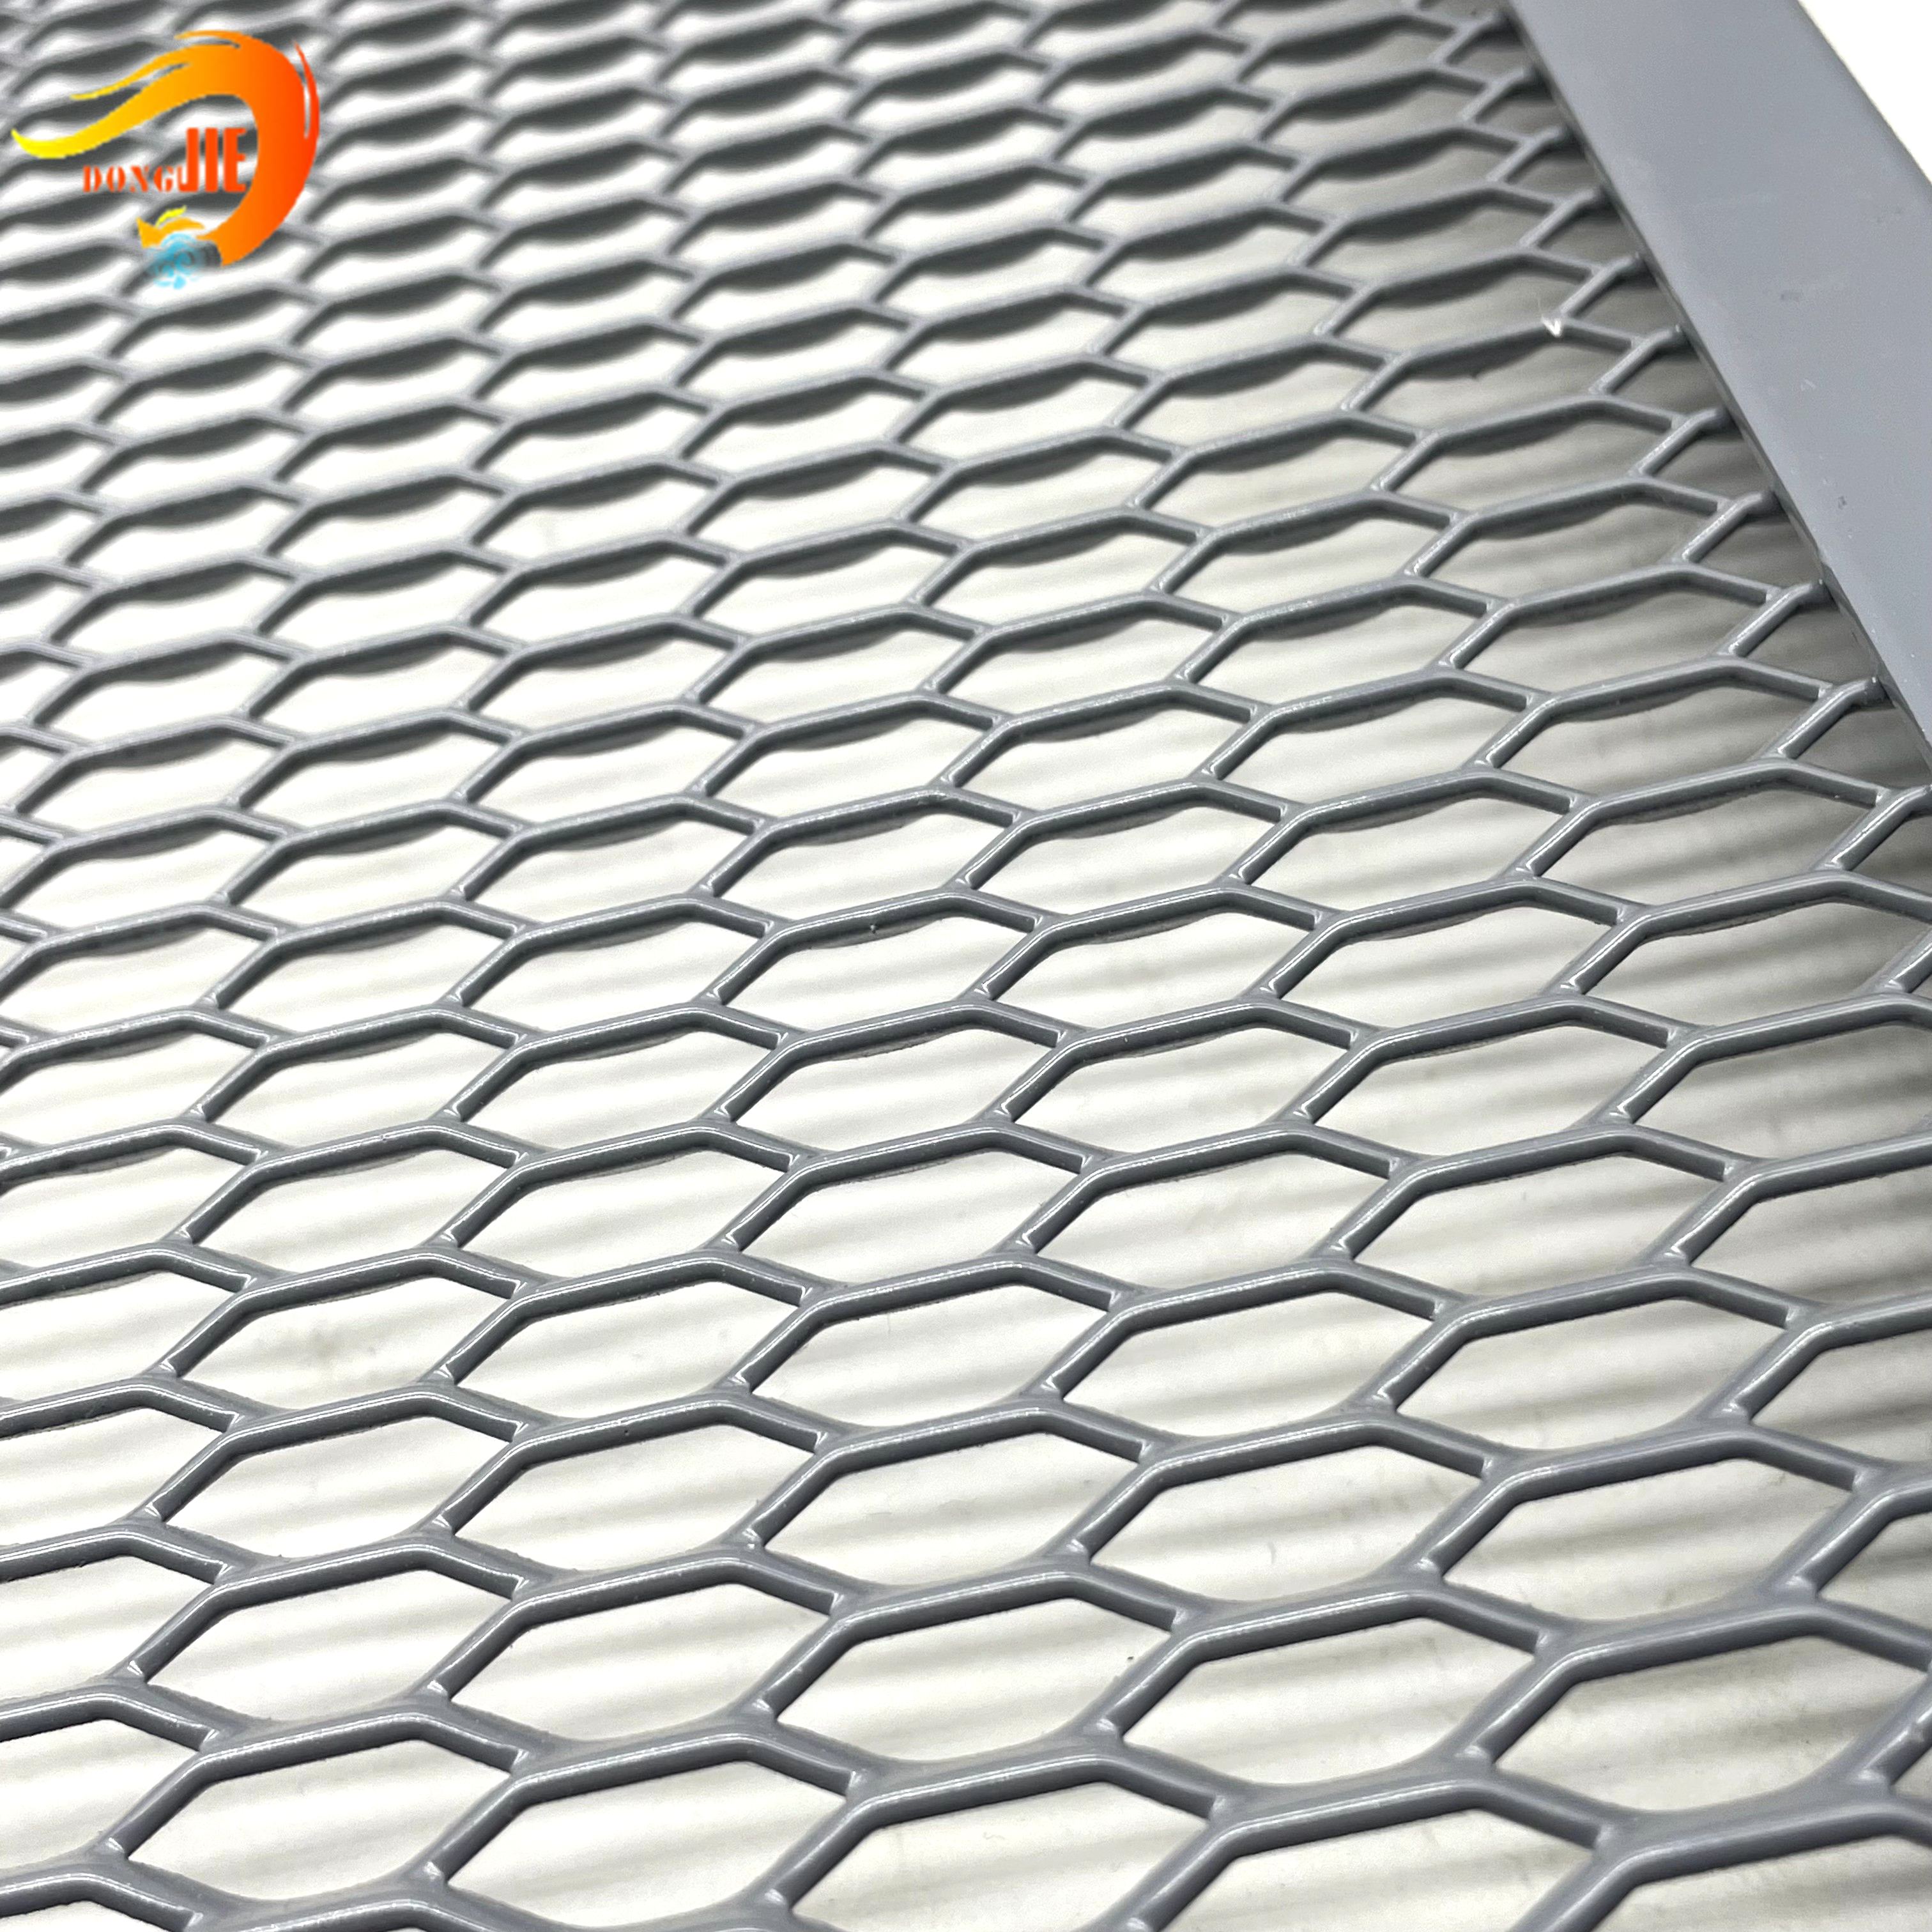 Manufacturer of Ceiling Mesh – Stretching Mesh Sheet Expanded Aluminum Mesh Ceilings Tiles – Dongjie